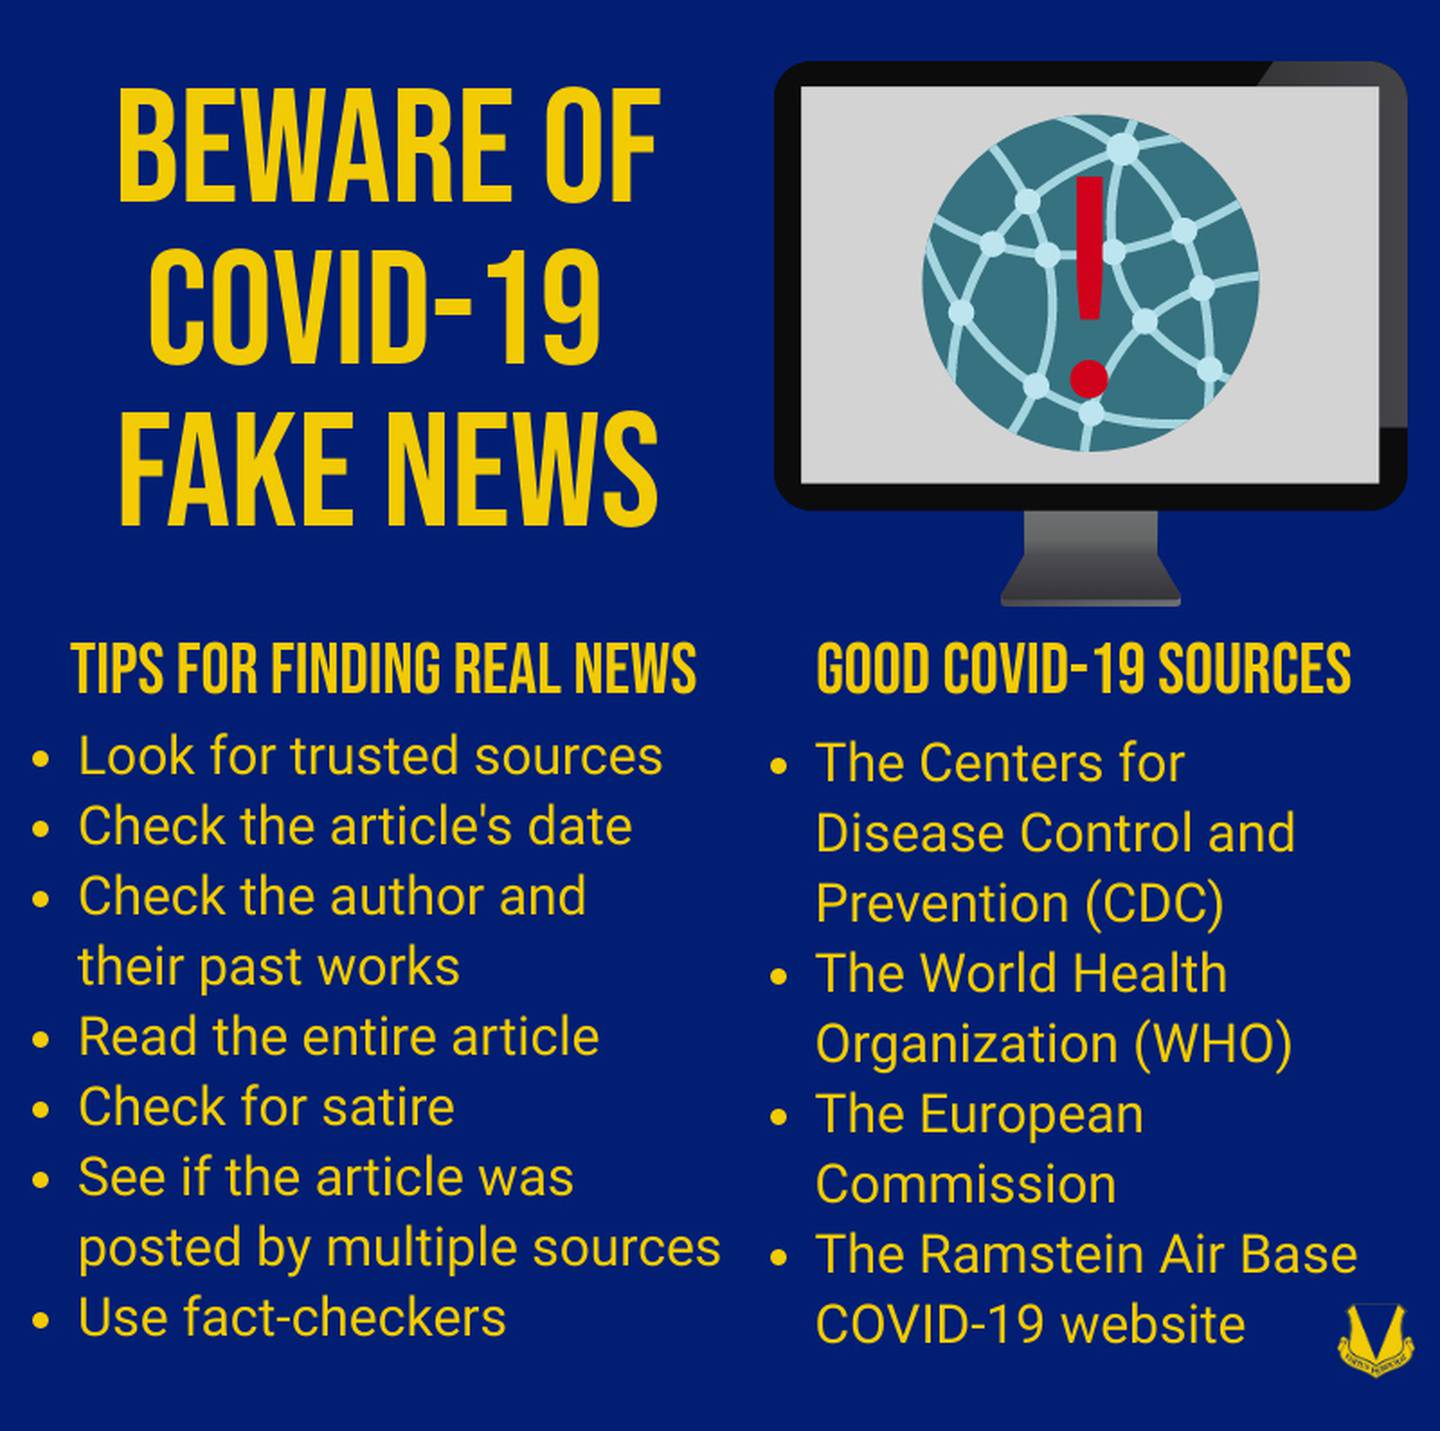 This graphic displays good sources for coronavirus disease 2019 news and tips for finding real news.